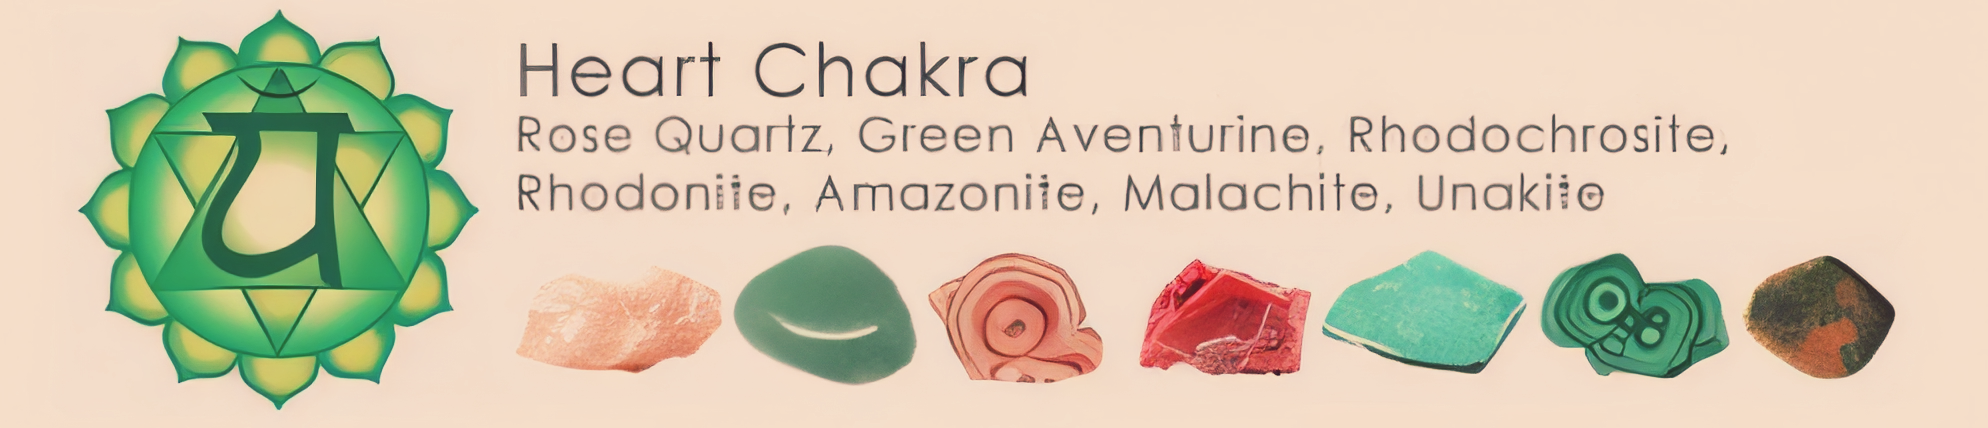 Heart Chakra Symbol and Gemstones that are healing/ strengthening it with Pictures.